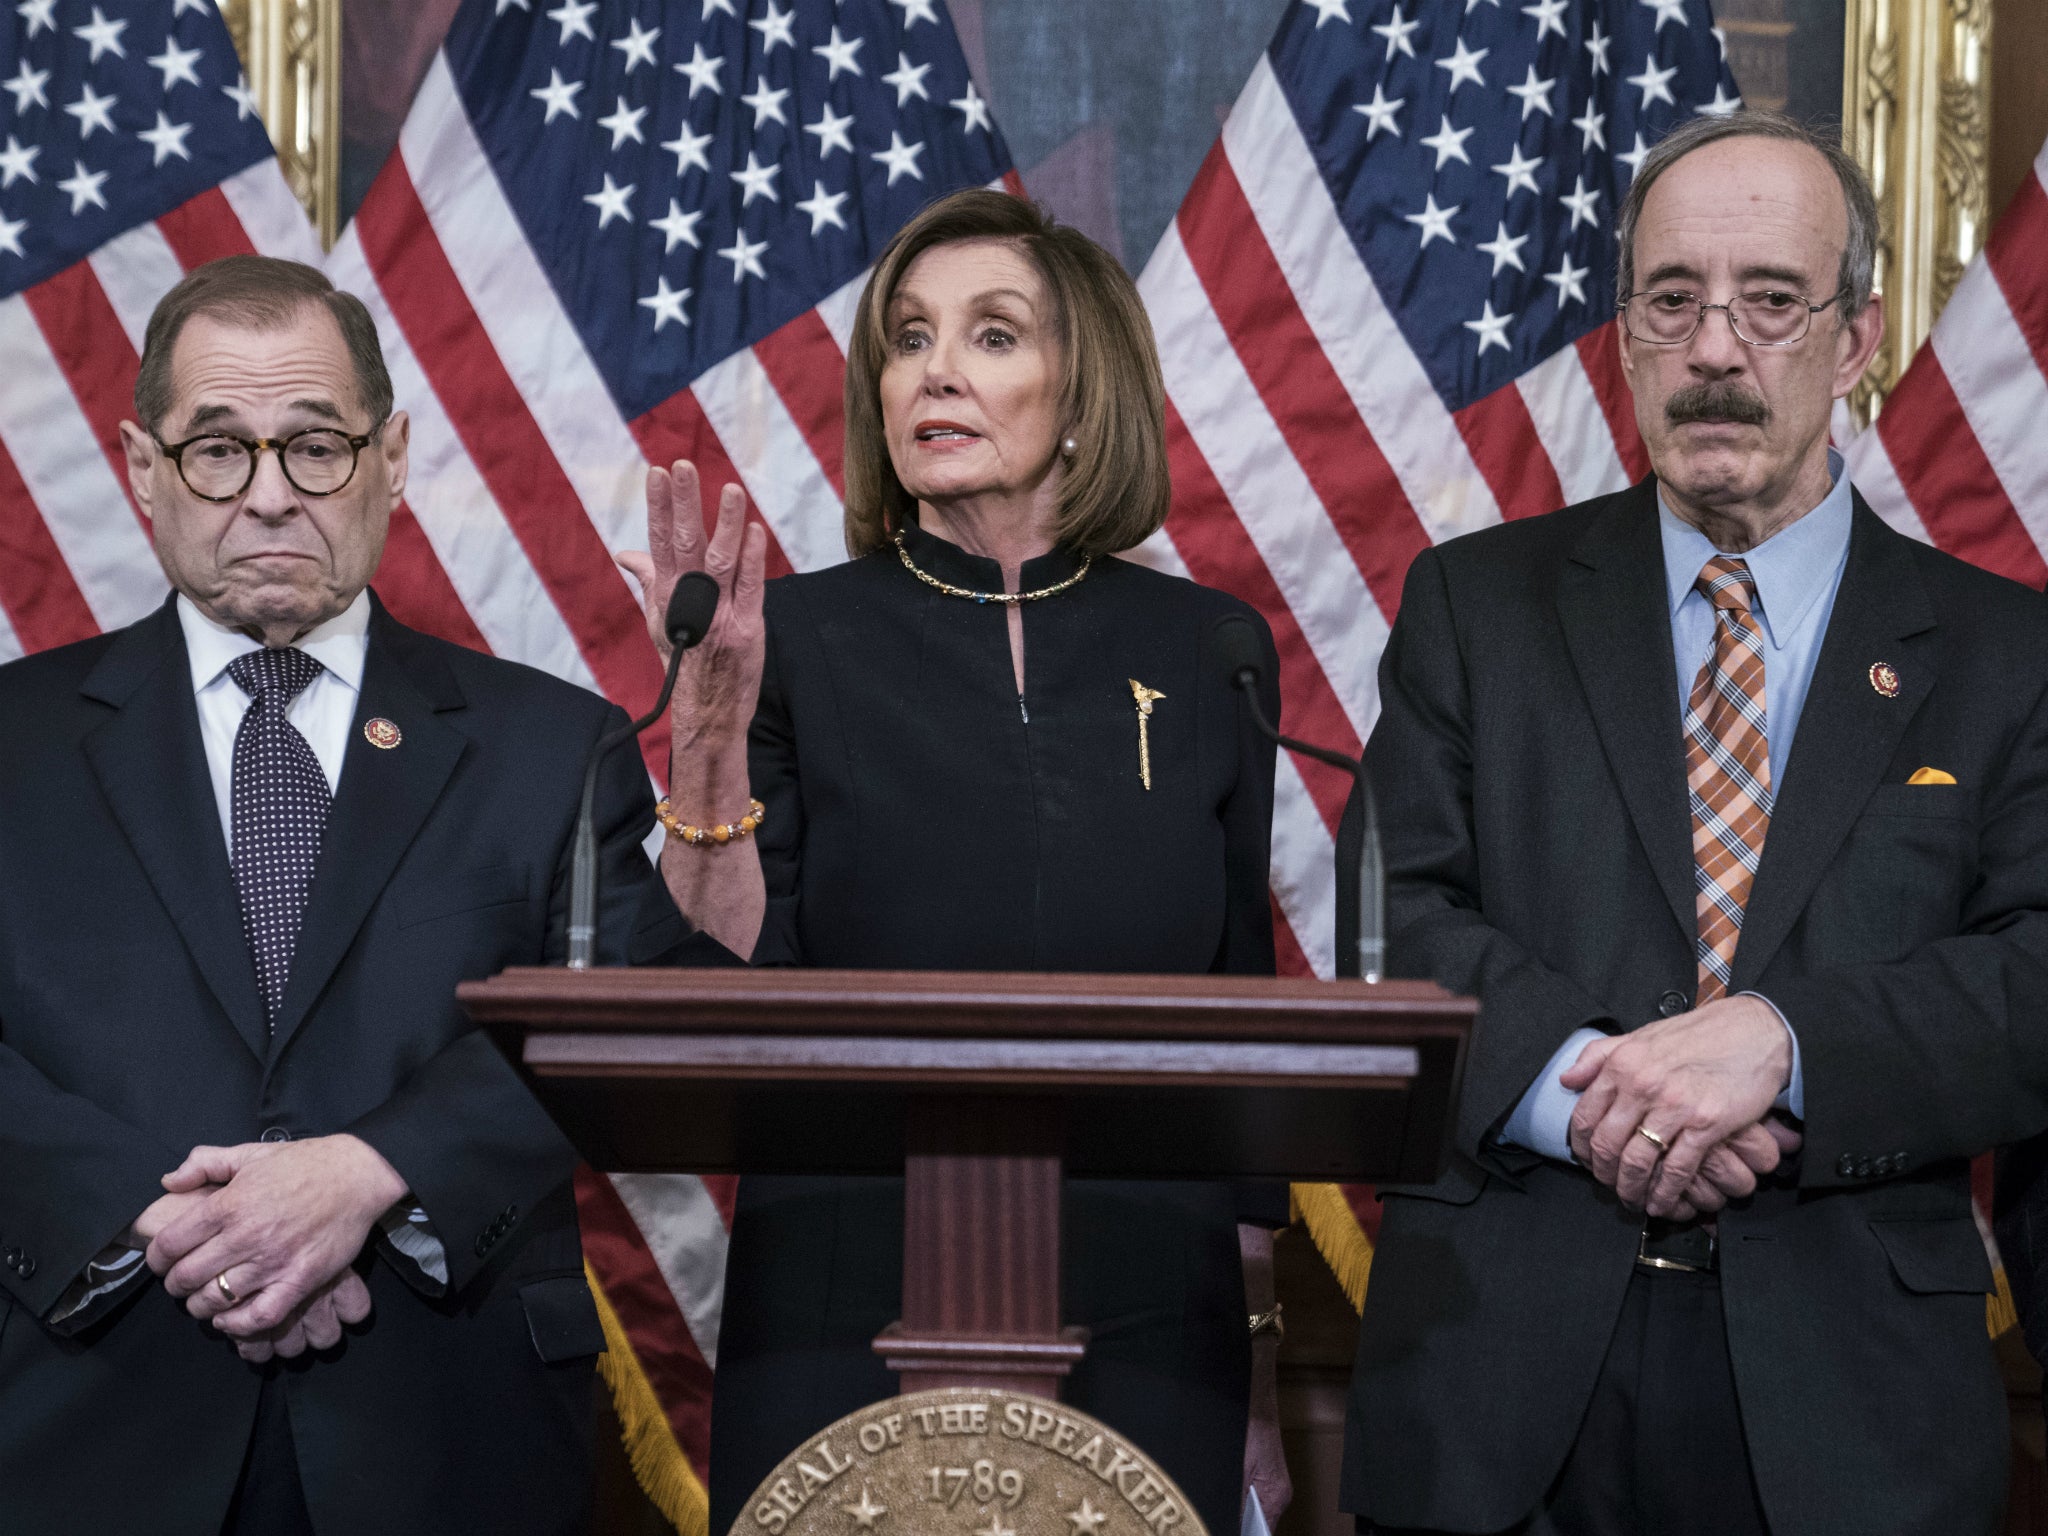 It's not clear yet whether impeachment could hurt the Democrats chances of success in 2020